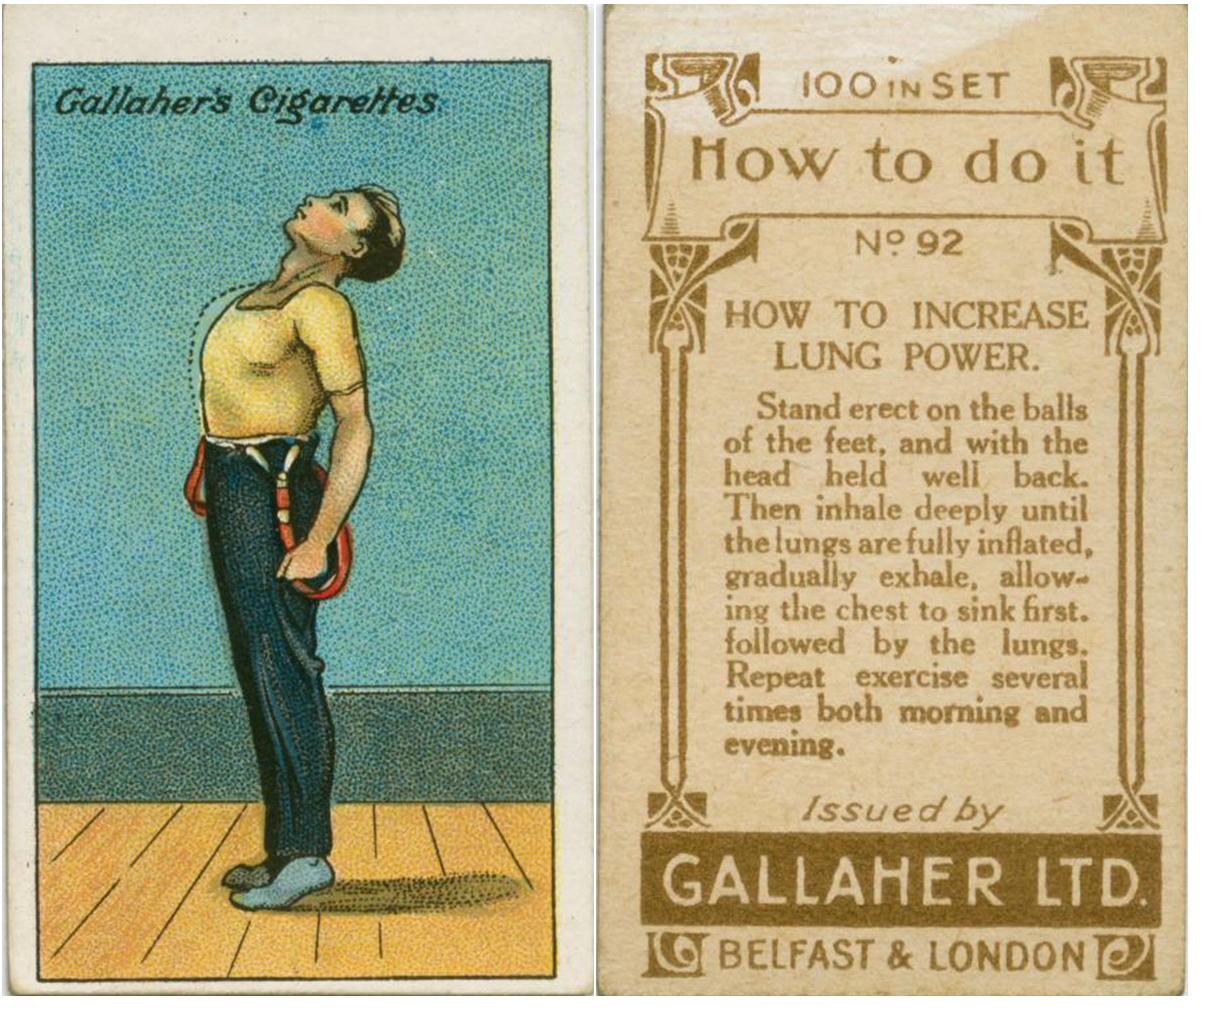 Life hack - Gallaher's Cigarettes S 100 In Set SP2 How to do it Z No 92 How To Increase Lung Power Stand erect on the balls of the feet, and with the head held well back. Then inhale deeply until the lungs are fully inflated, gradually exhale, allow ing t